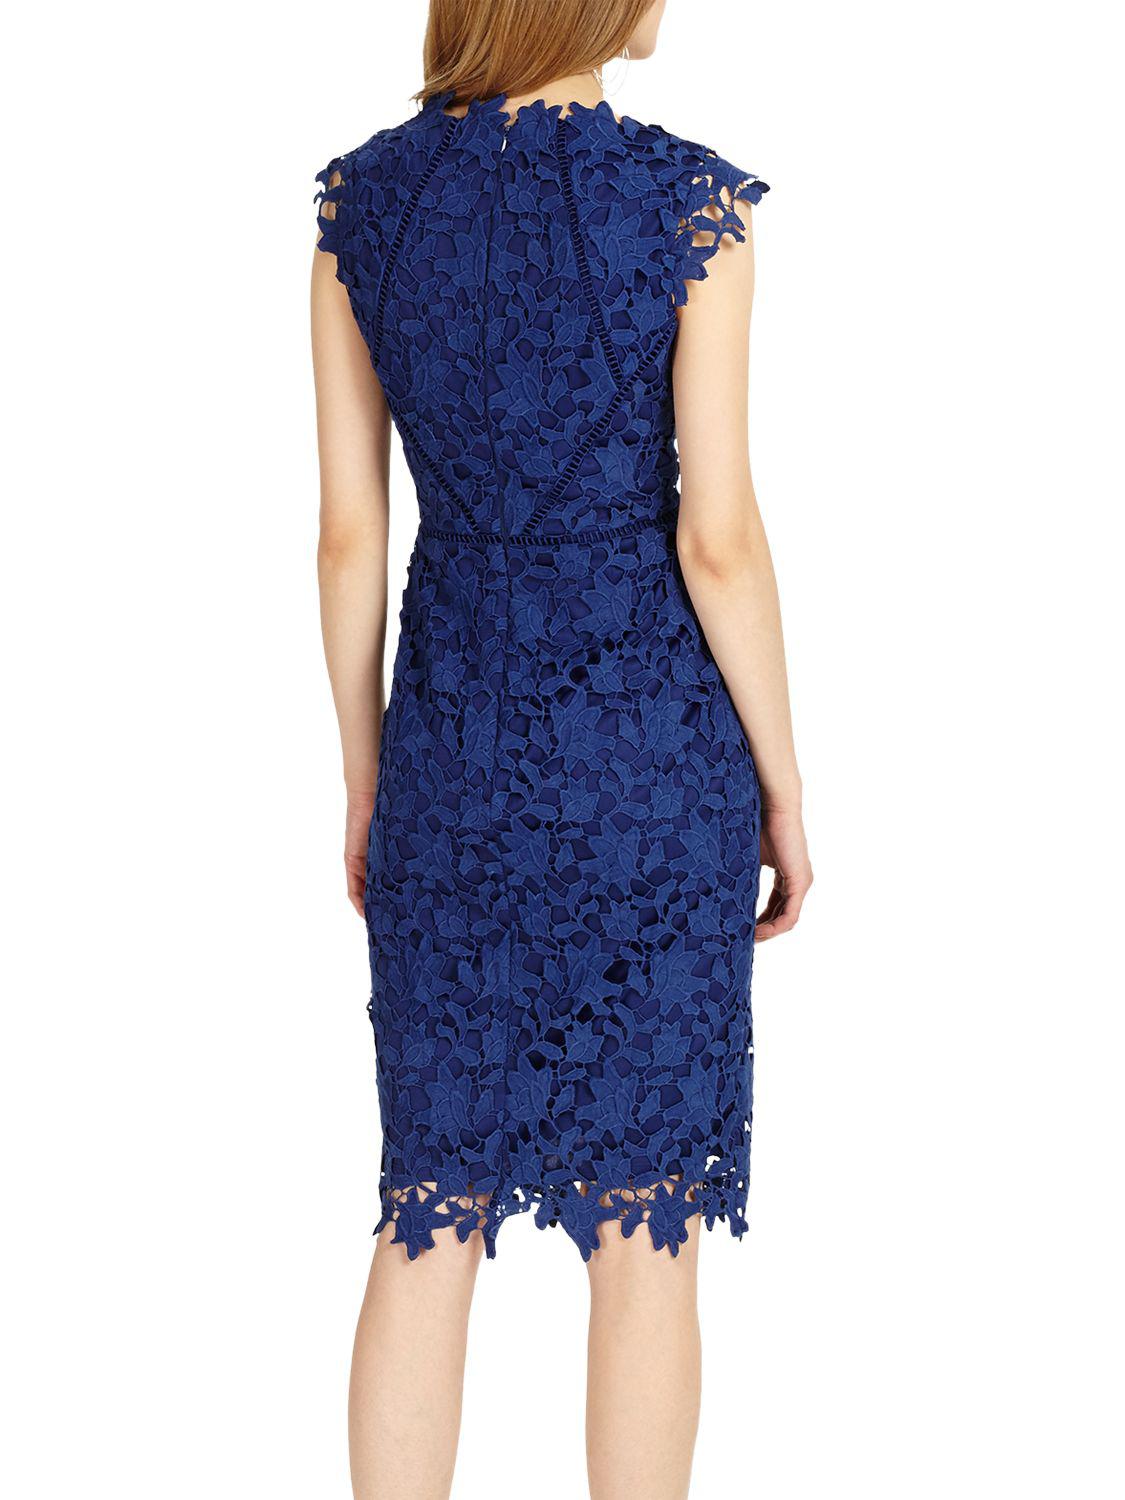 Phase Eight Petals Lace Dress in Blue - Lyst